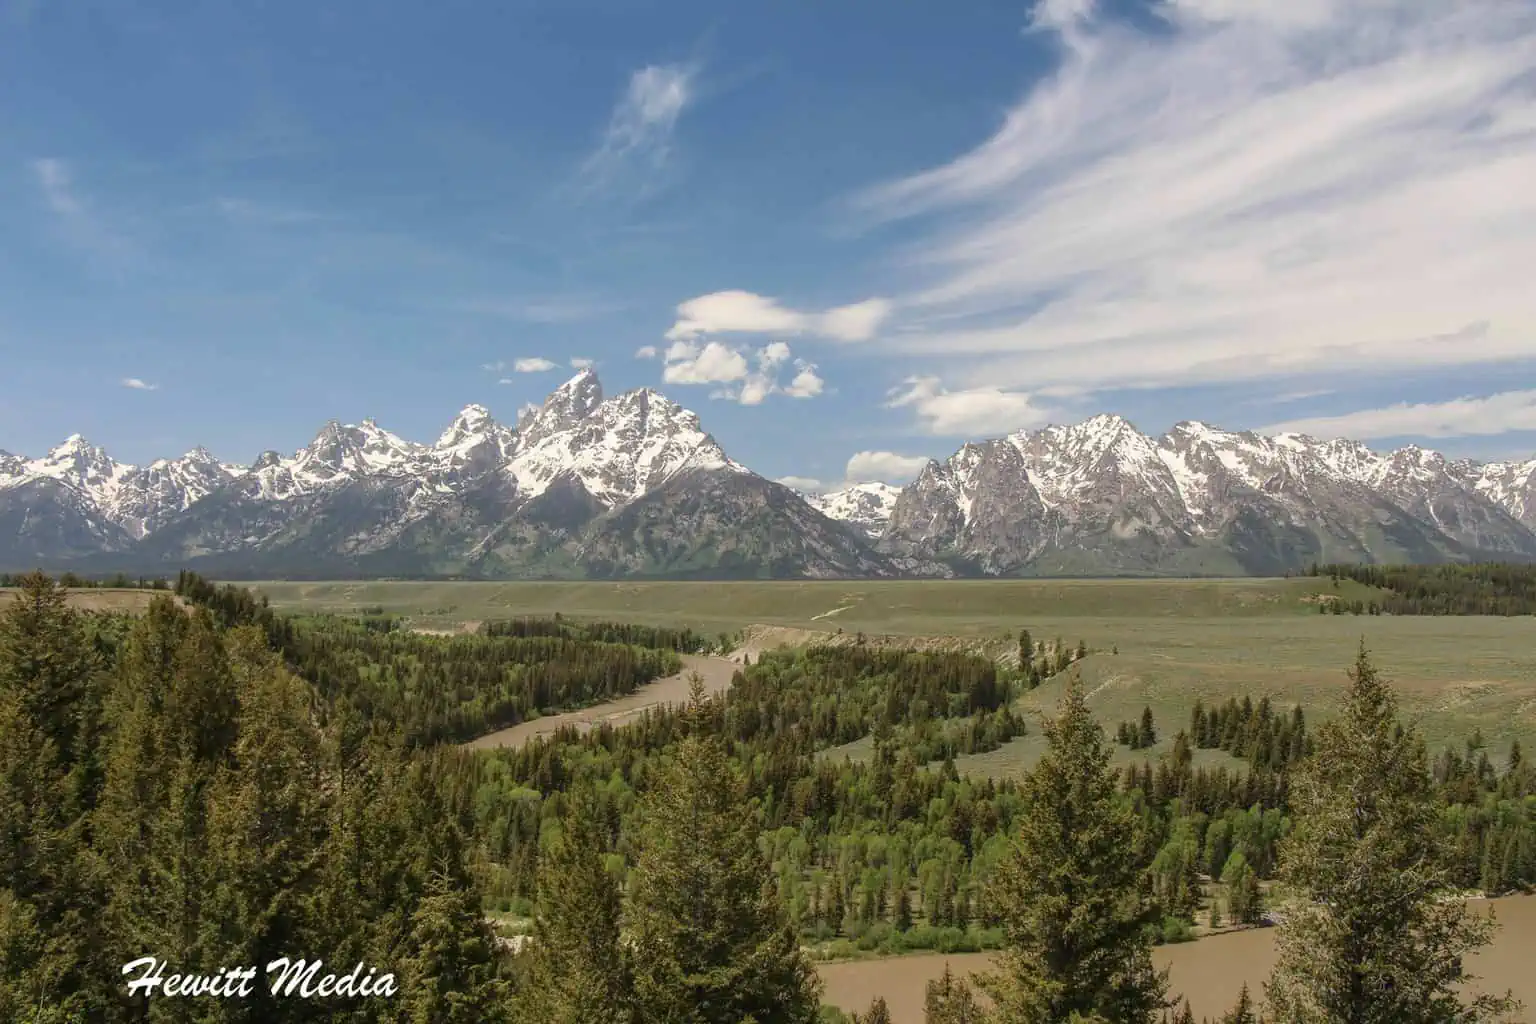 Best Hikes in the National Parks - Cascade Canyon Trail in Grand Teton